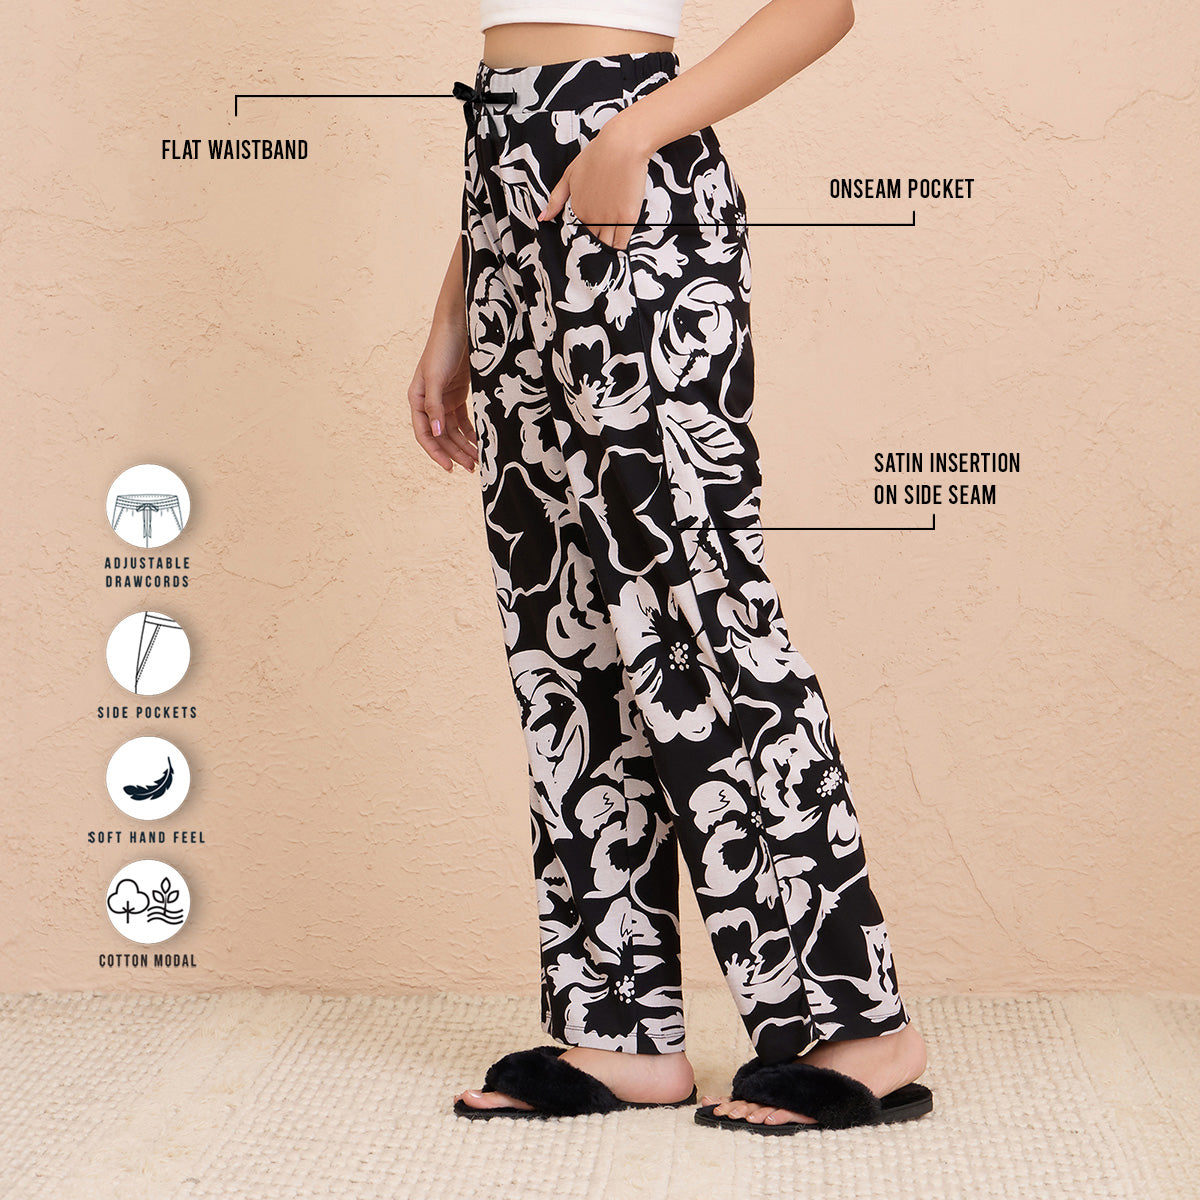 Nykd By Nykaa Sleep Essential Super Comfy Cotton-Modal Pajama- NYS911- Black and White Floral